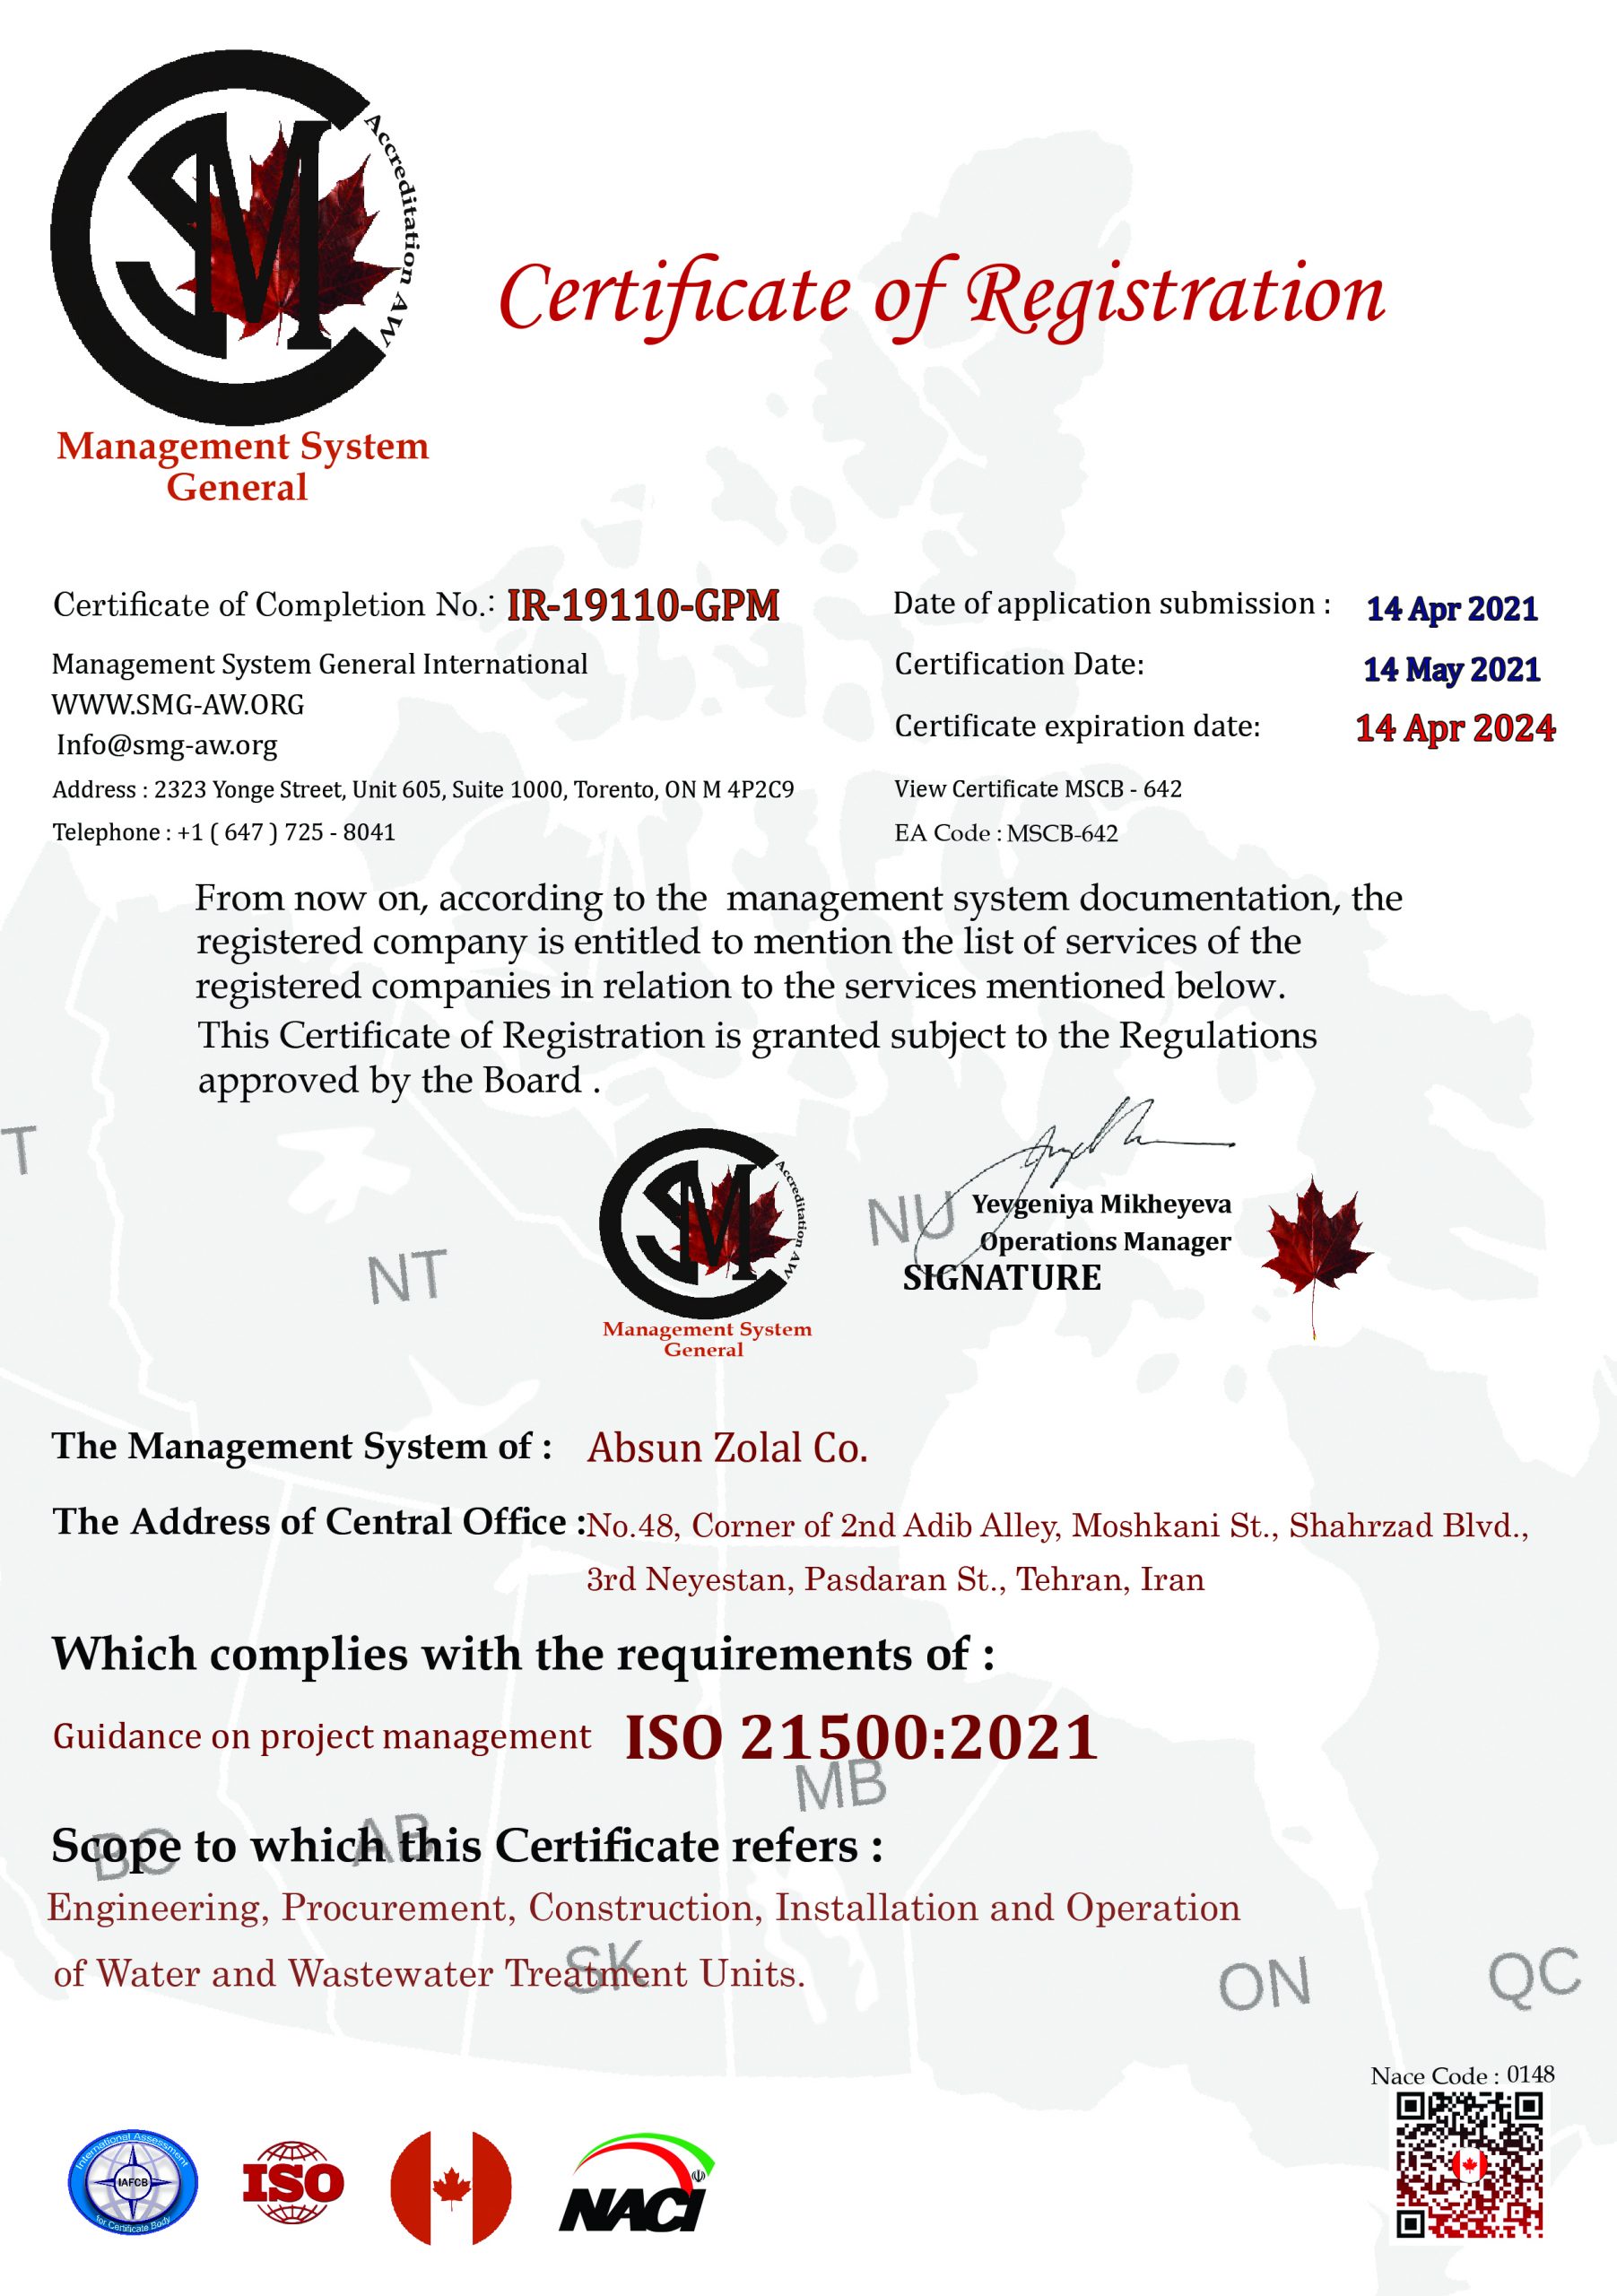 absunzolal certificated